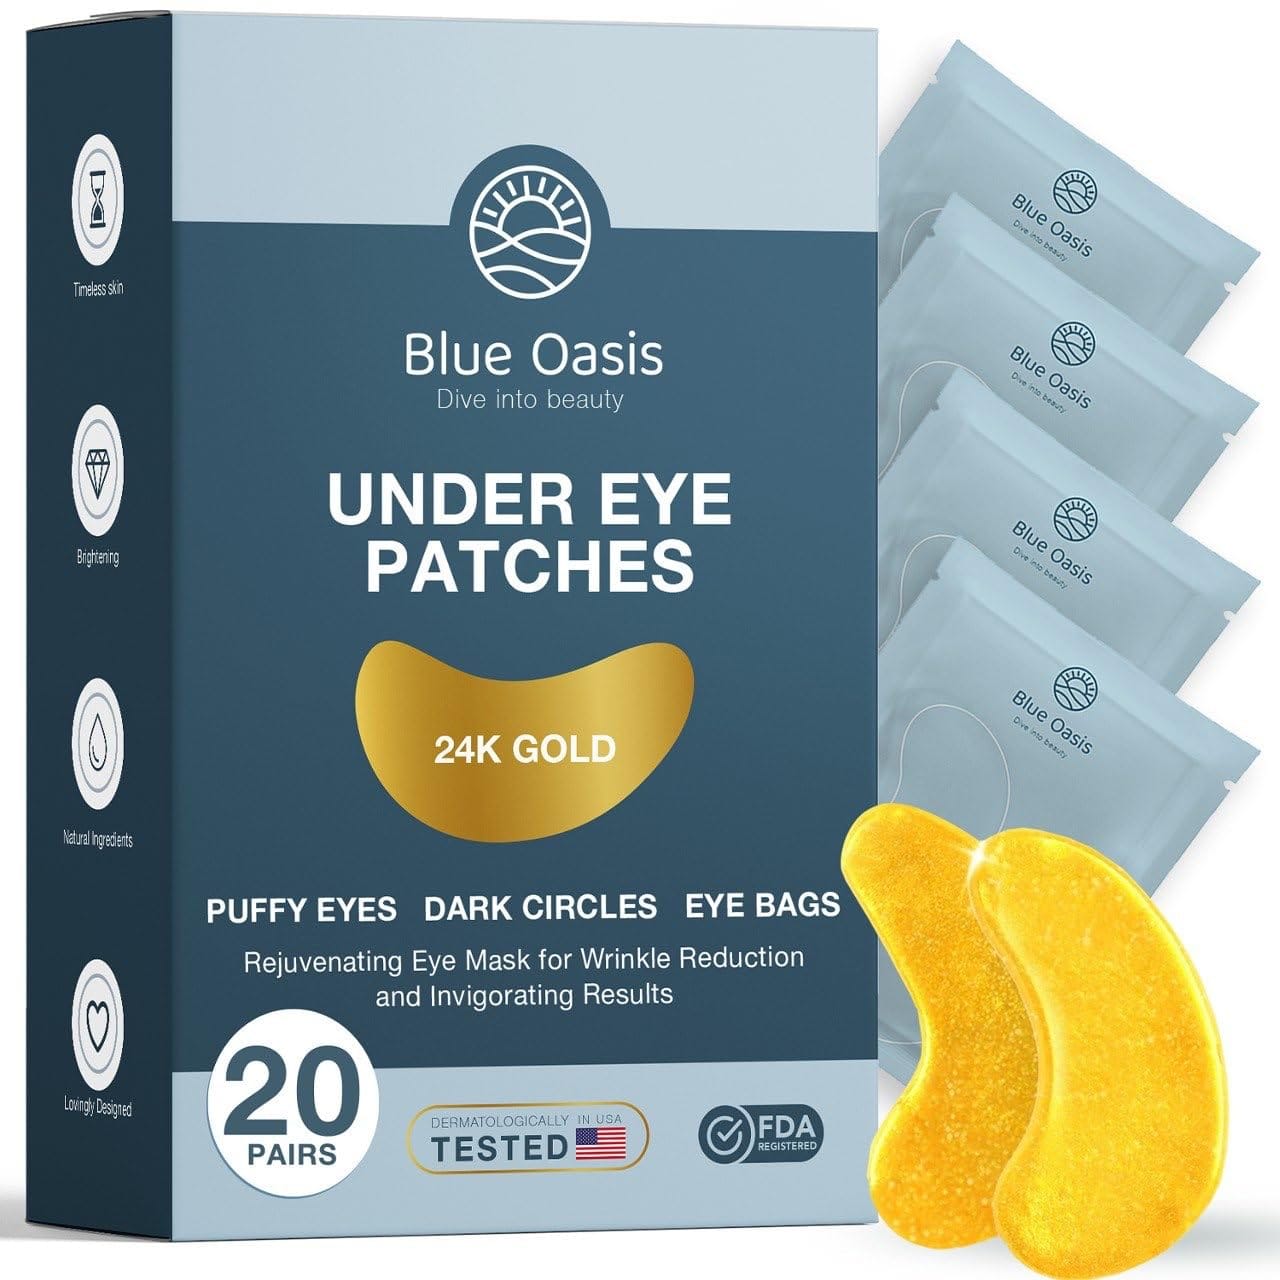 Under Eye Patches for Puffy Eyes Review